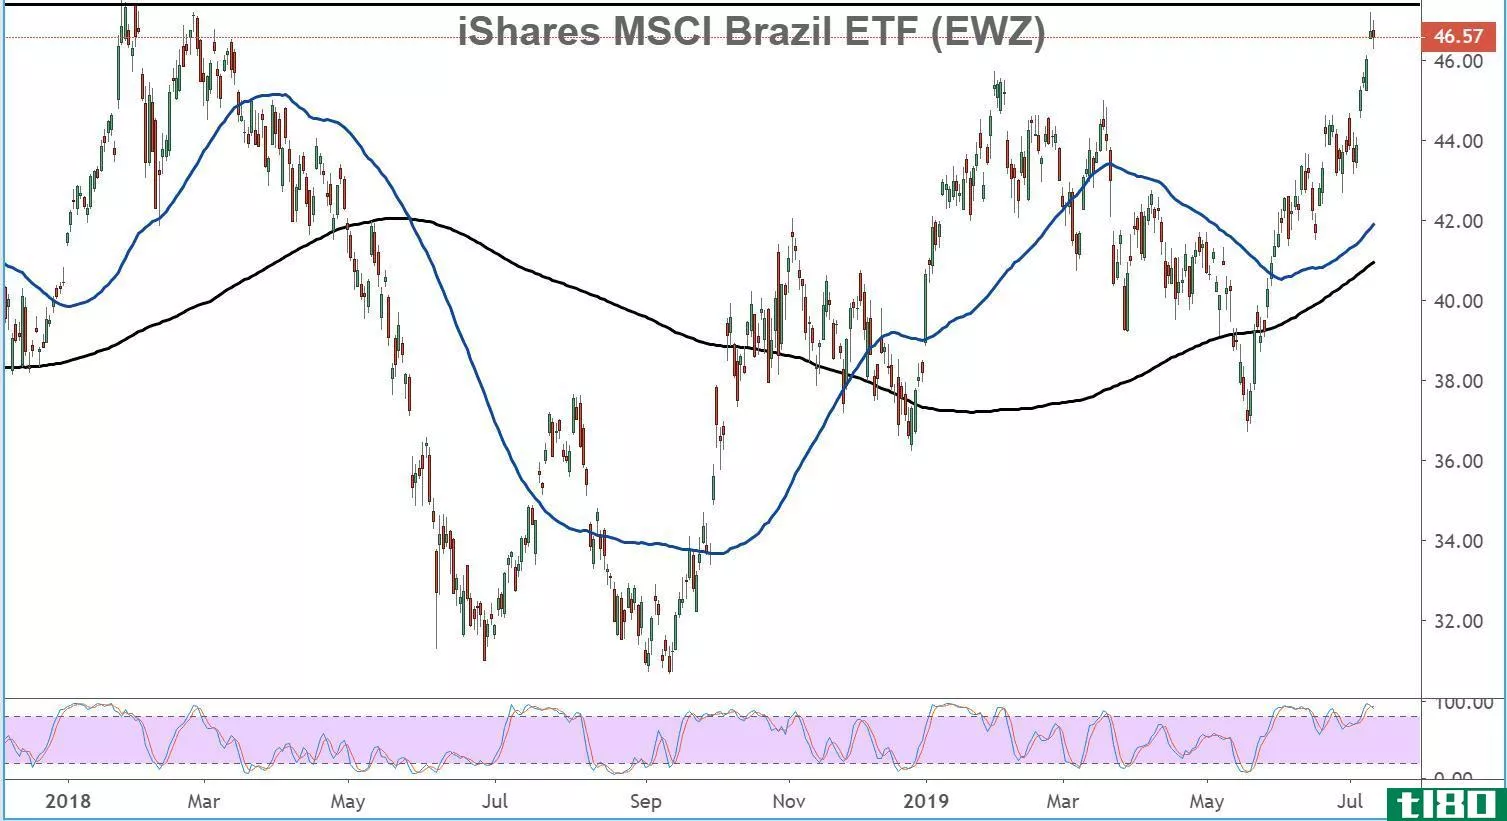 Chart showing the performance of the iShares MSCI Brazil ETF (EWZ)